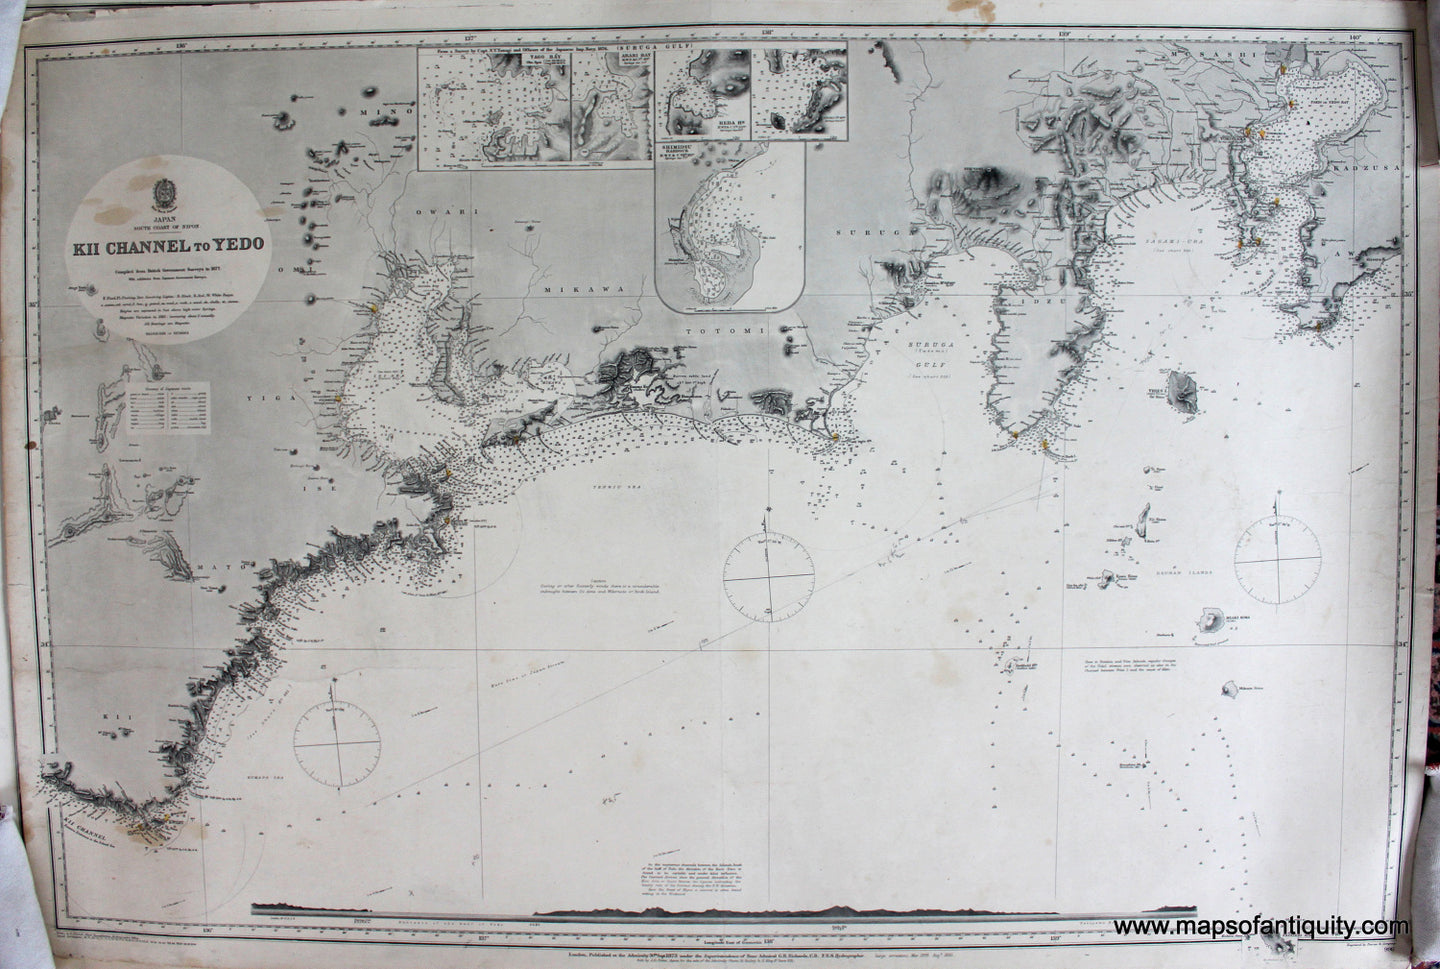 Black-and-White-Nautical-Chart-Japan---Kii-Channel-to-Yedo---Tokyo-Asia-Japan-1885-British-Admiralty-Maps-Of-Antiquity